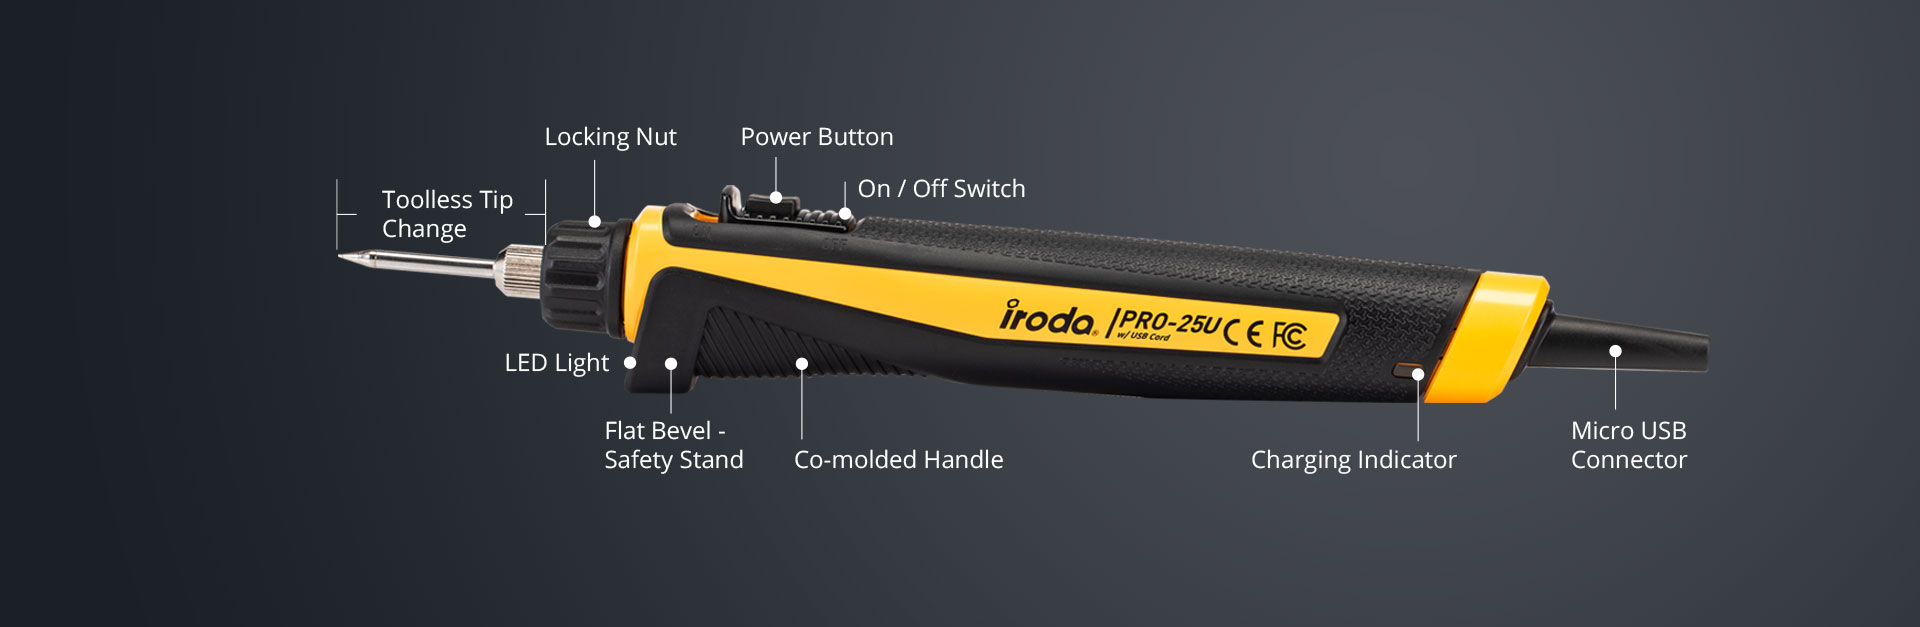 Main key features and description of PRO-25U Professional USB Cordless Soldering Iron from Pro-Iroda